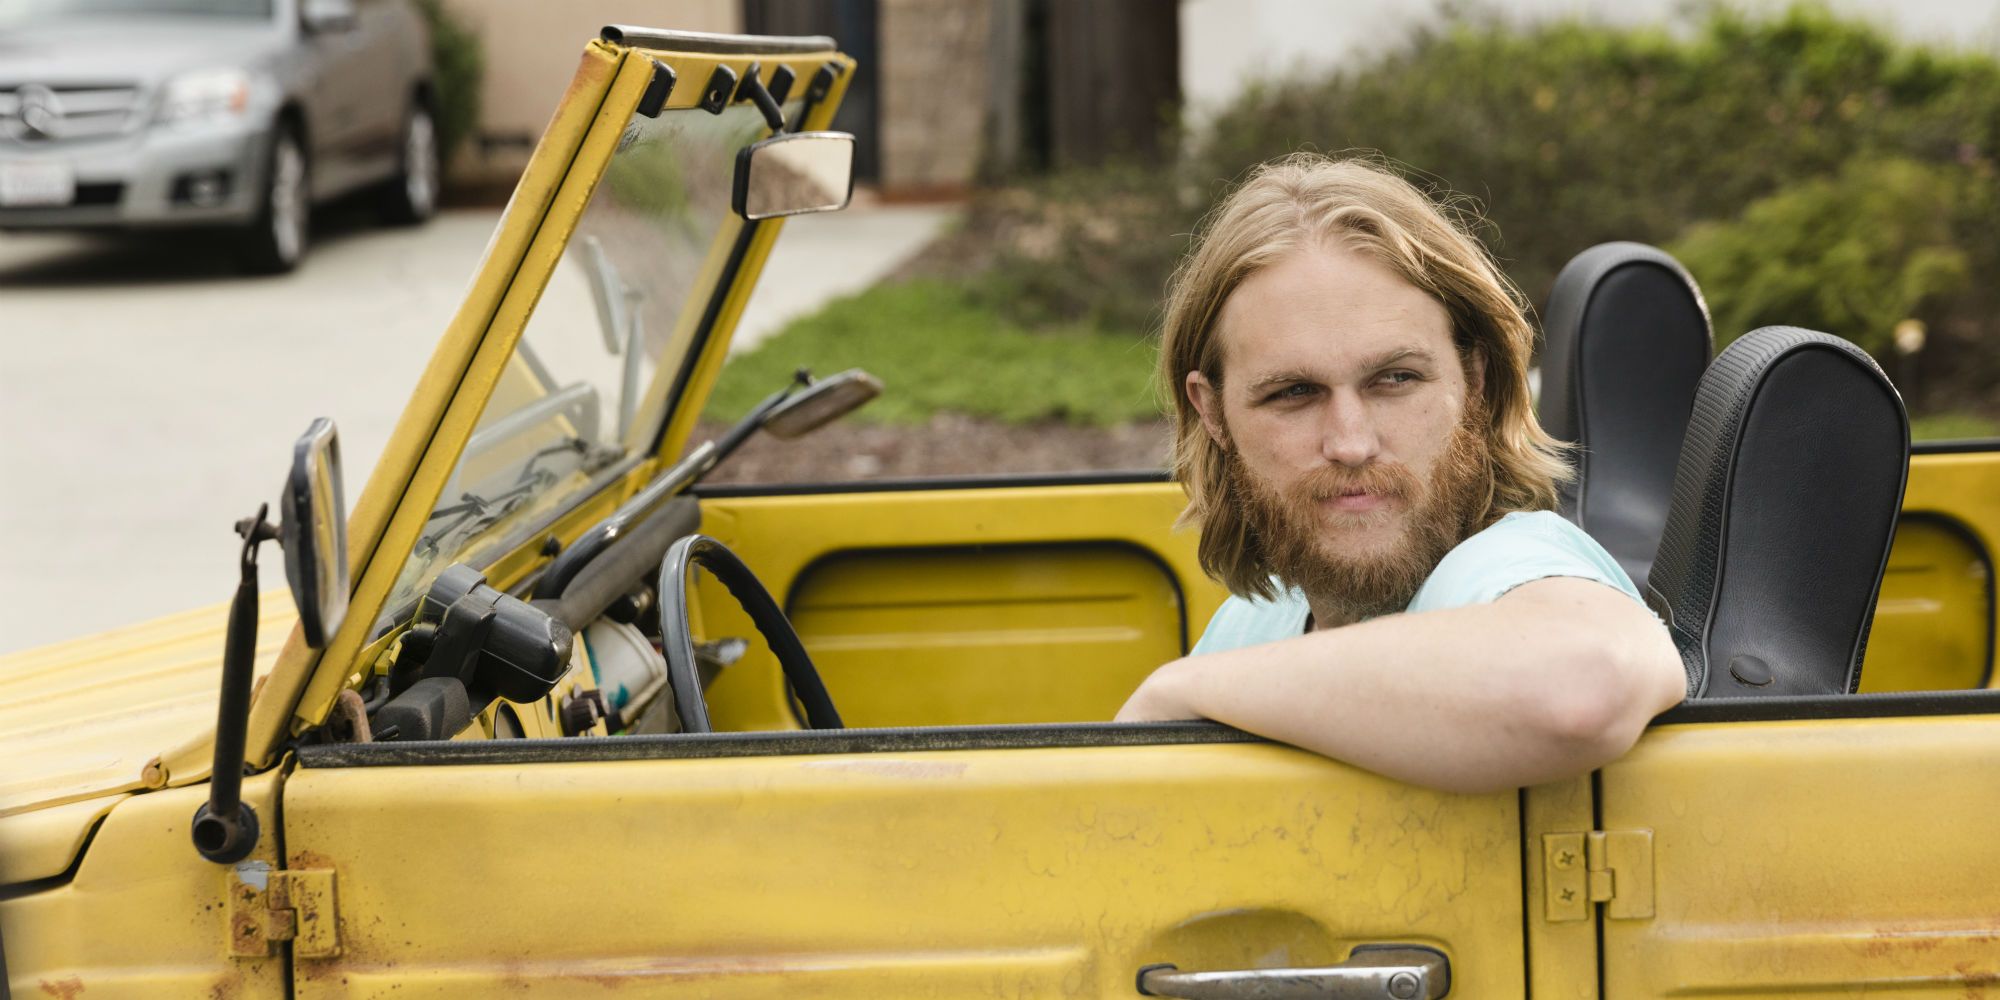 Dud leaning out of his car in Lodge 49